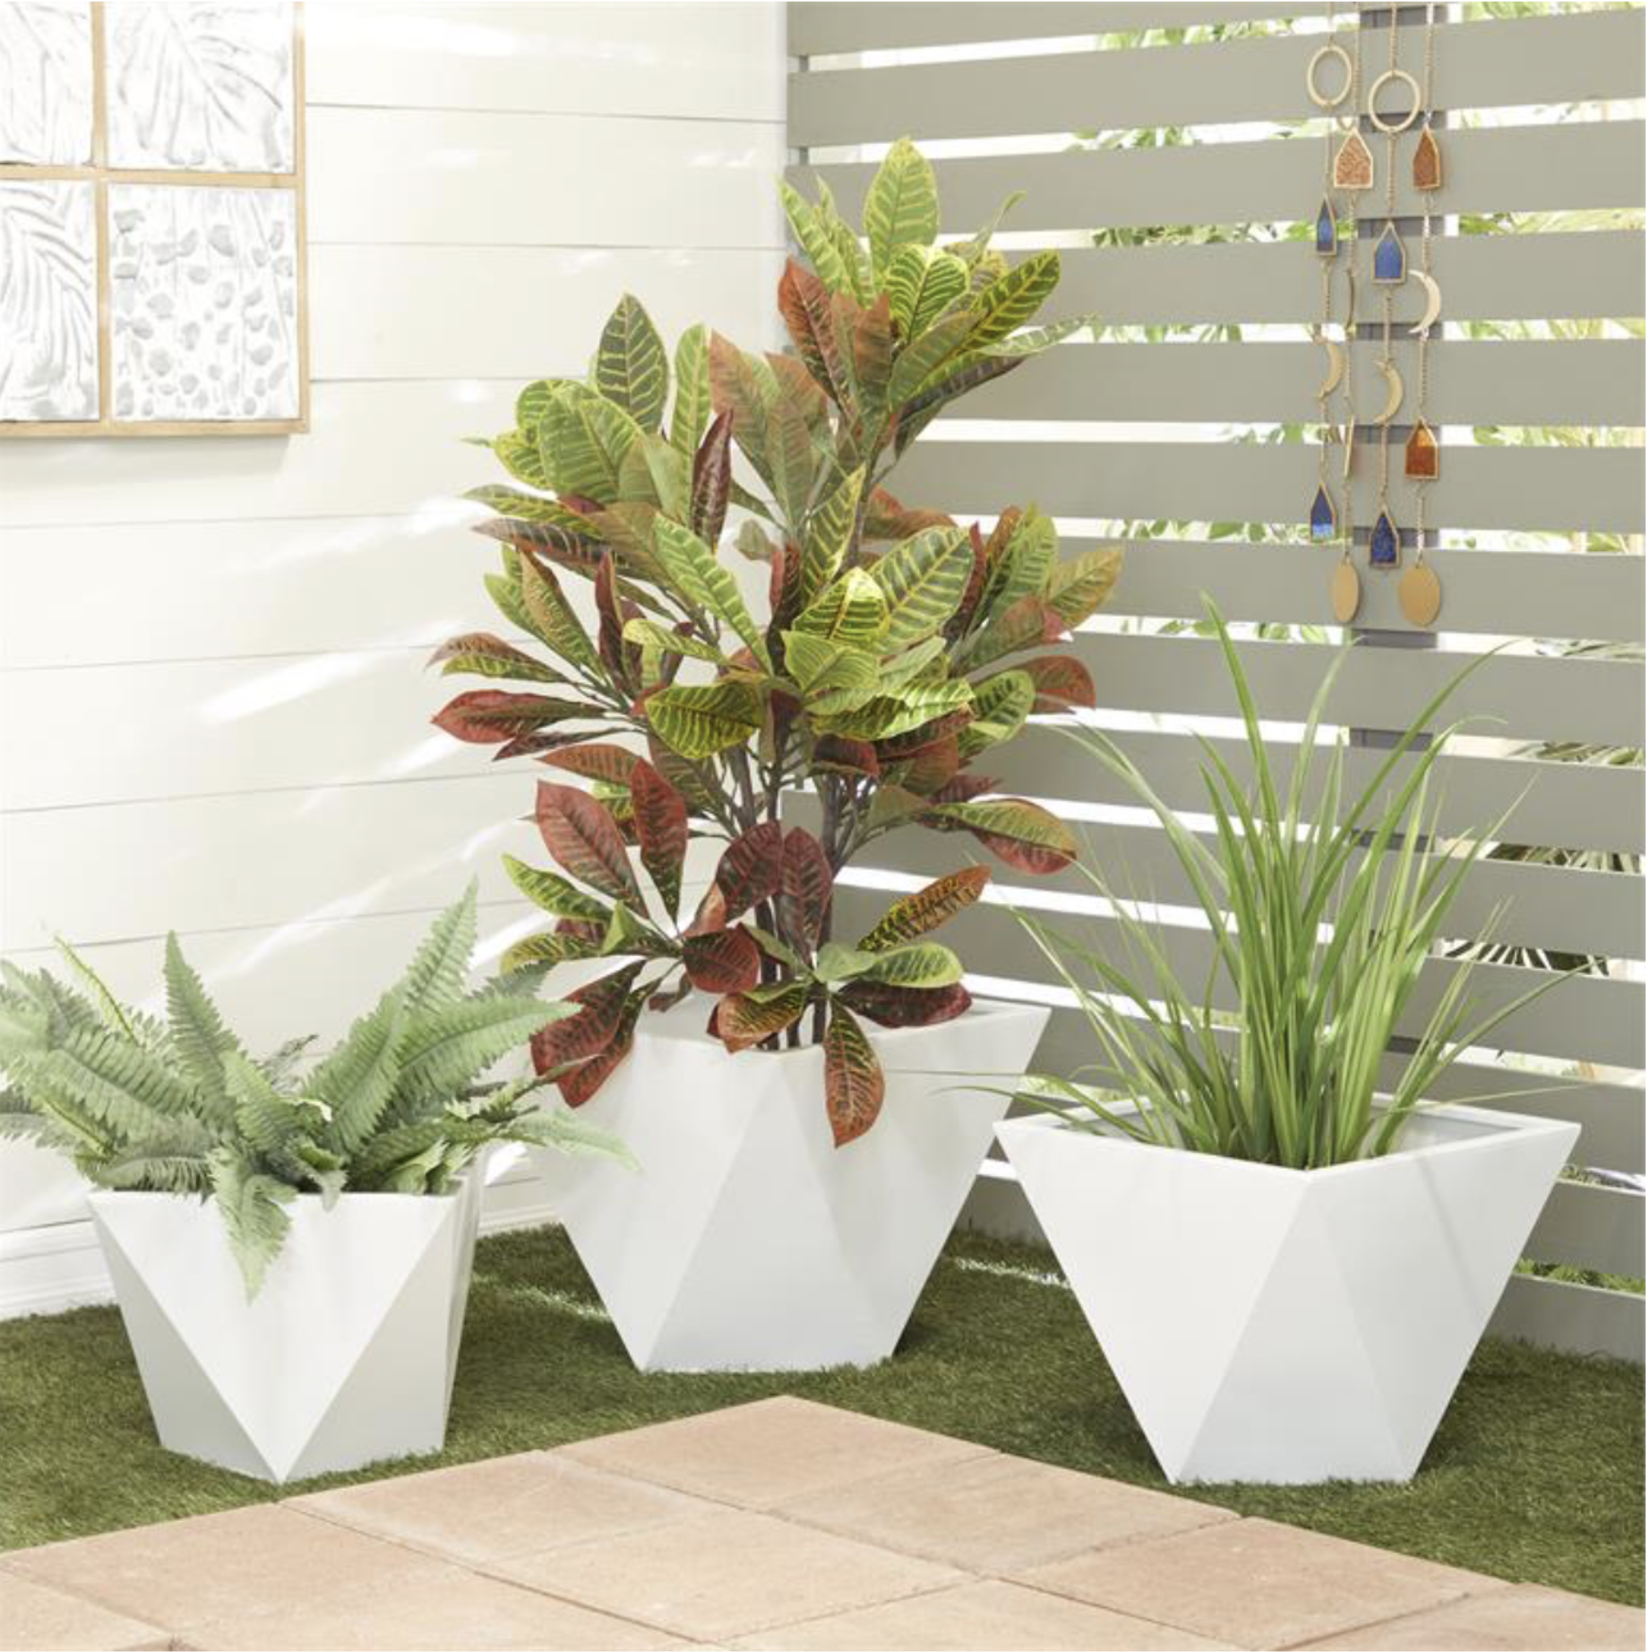 14.5”h x 18.5” LARGE WHITE METAL GEOMETRICAL INDOOR OUTDOOR PLANTER (NOT WATER TIGHT)